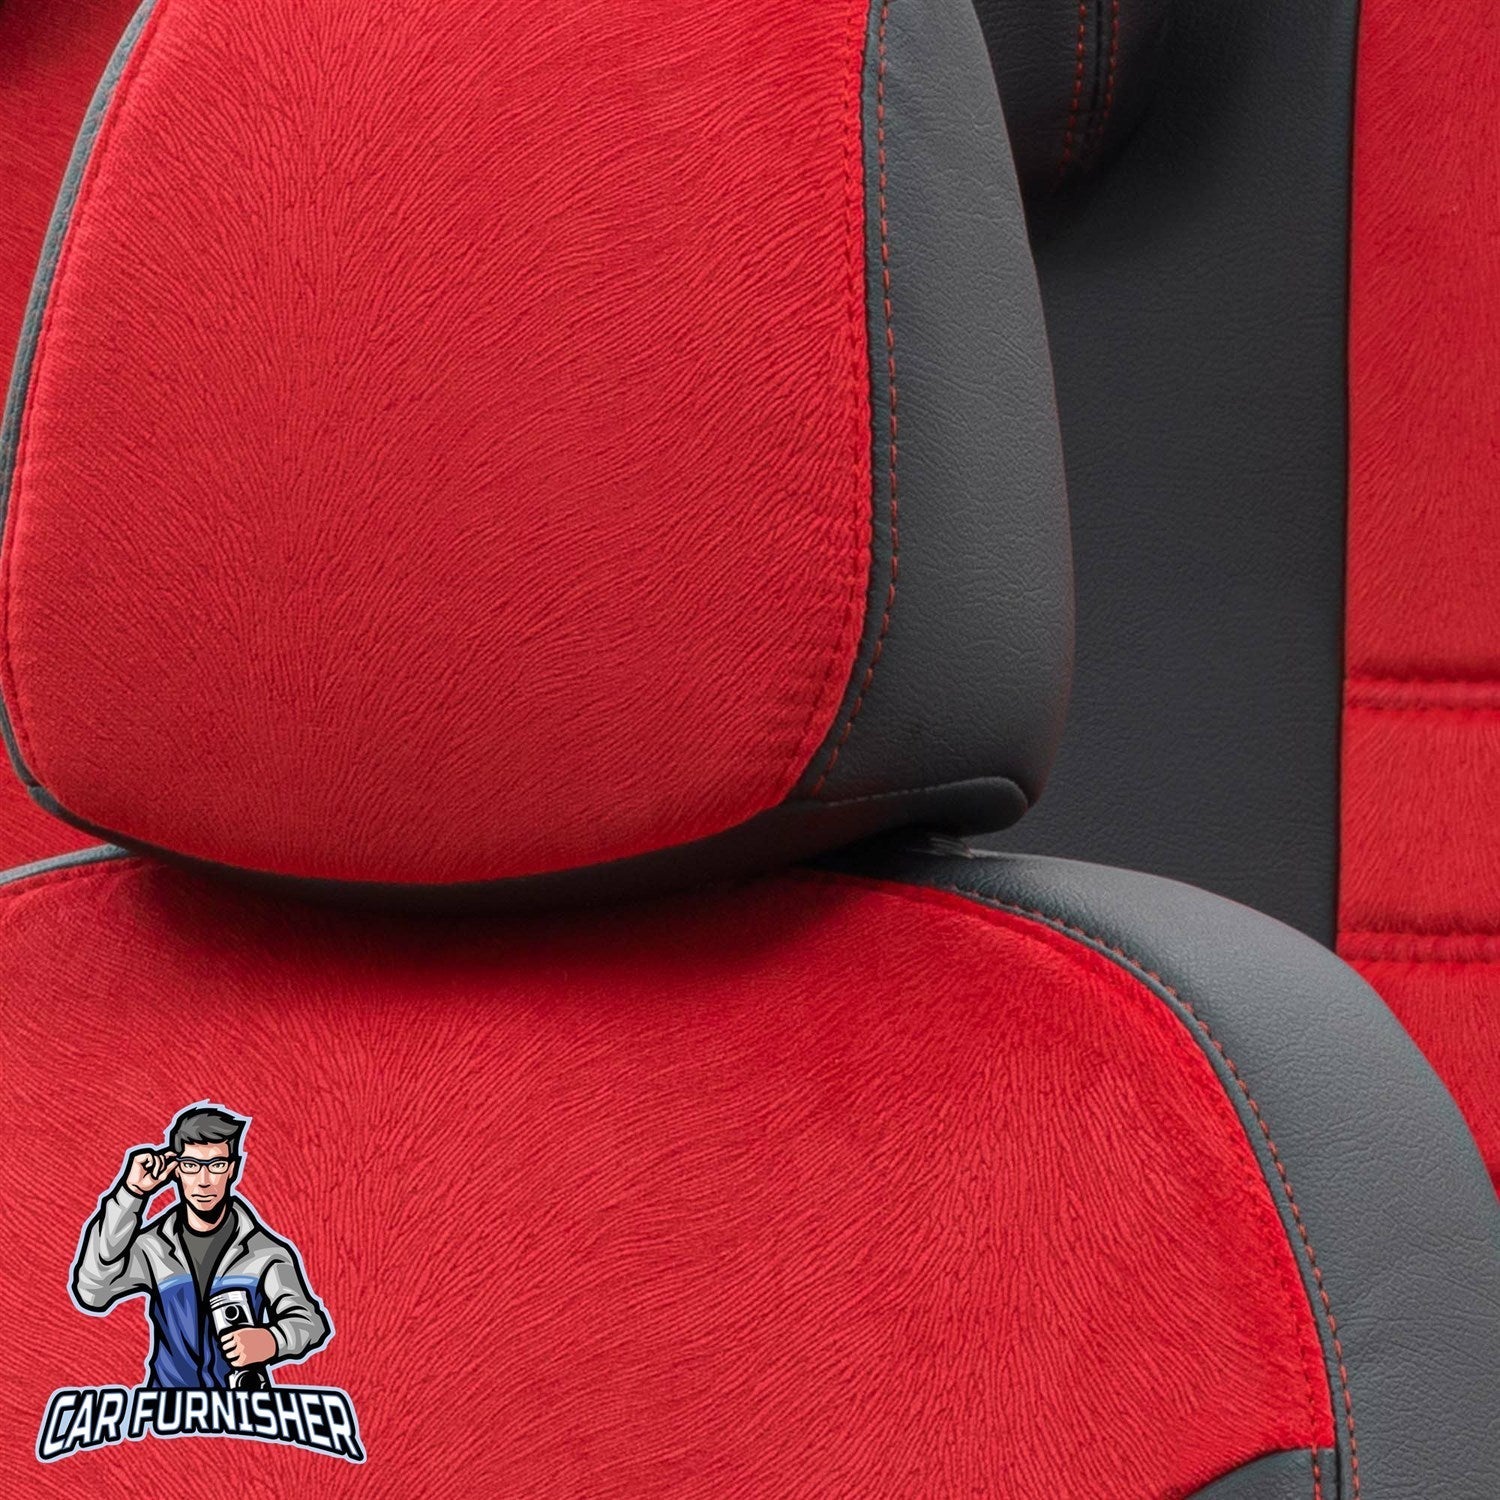 Ford S-Max Seat Covers London Foal Feather Design Red Leather & Foal Feather